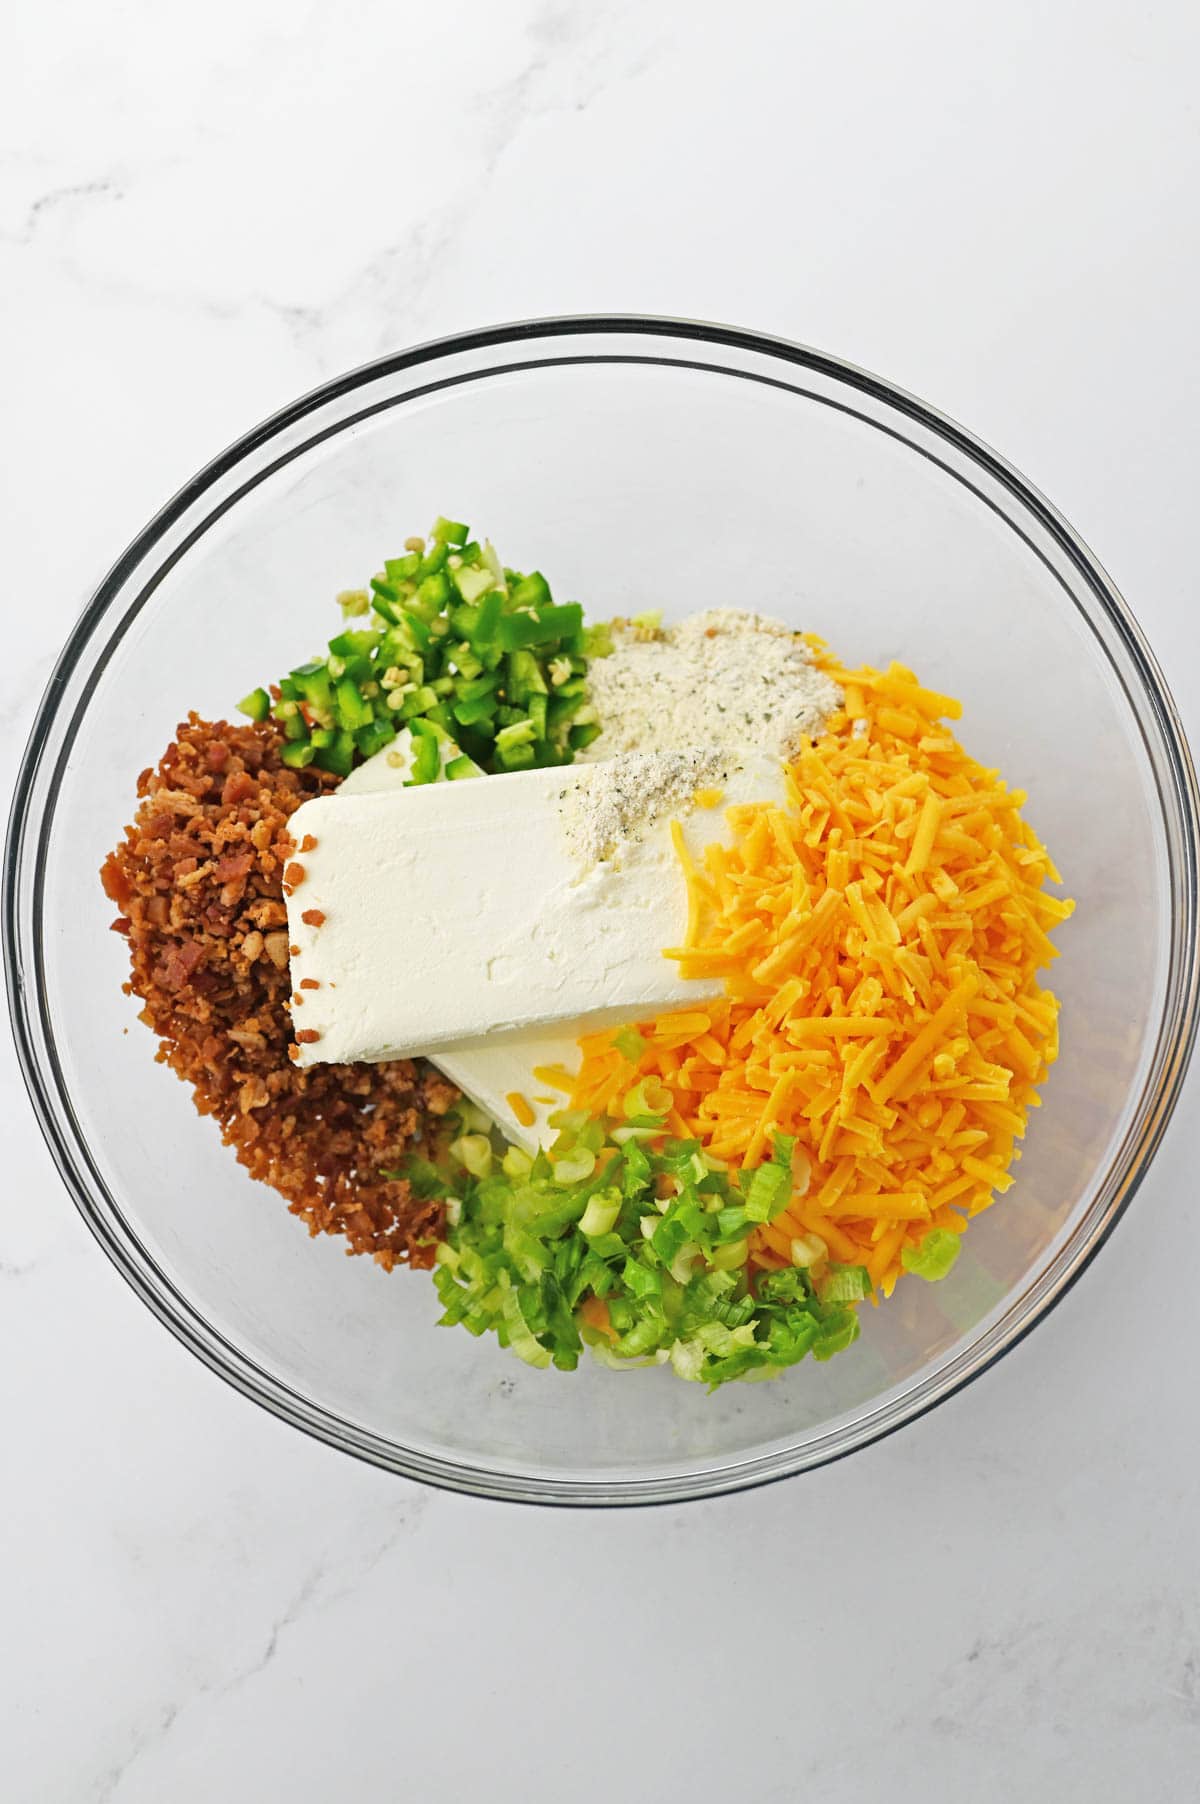 Cheese ball ingredients in clear bowl